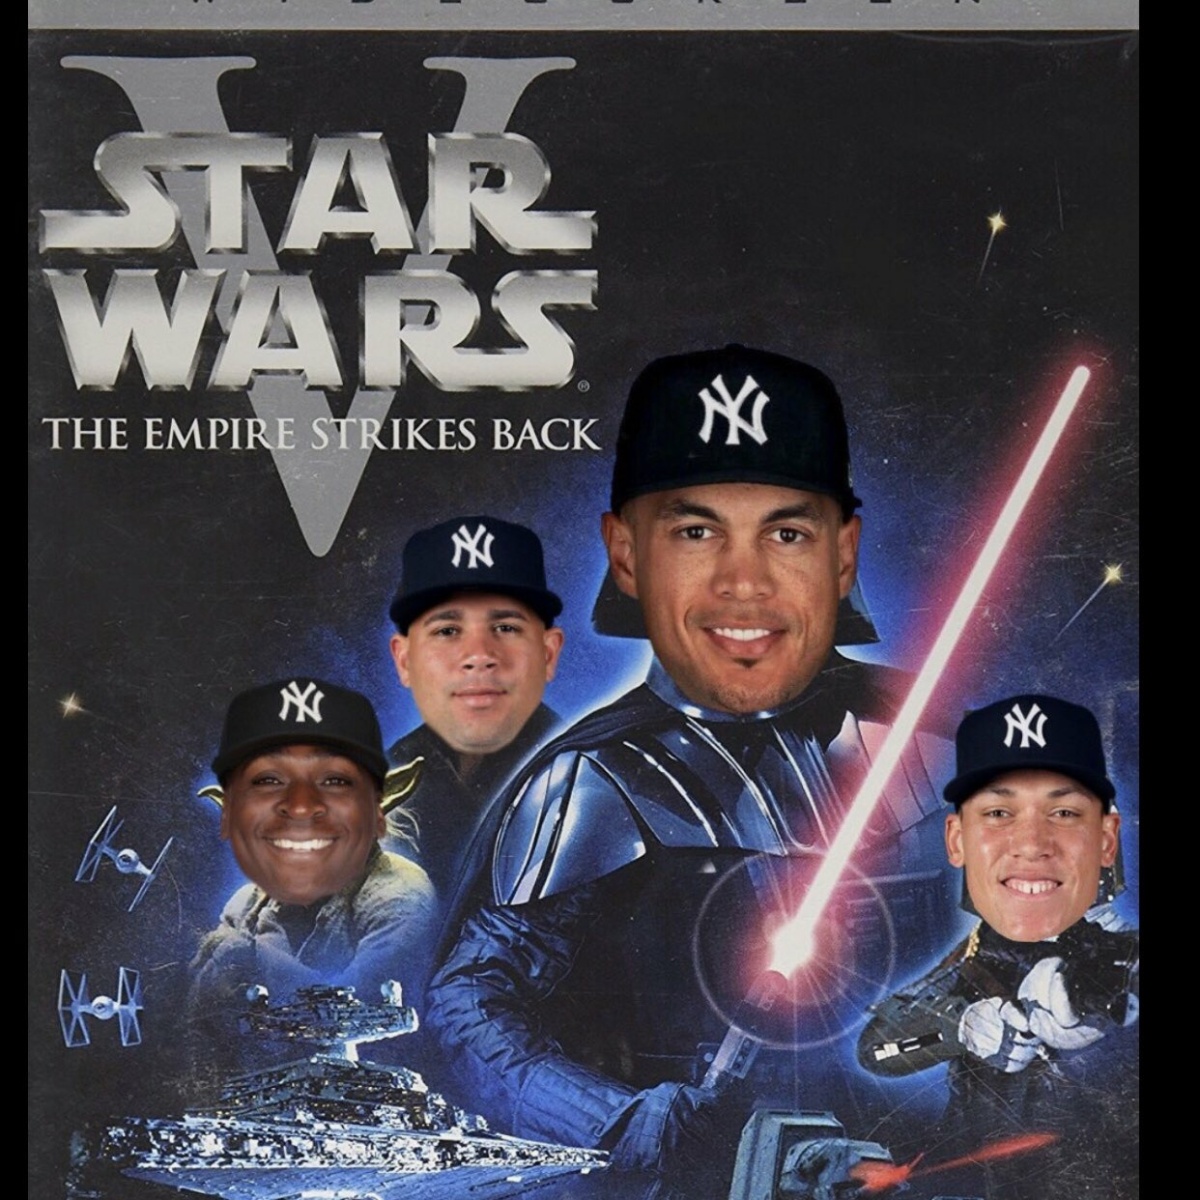 My Projections/predictions for the 2018 Yankees